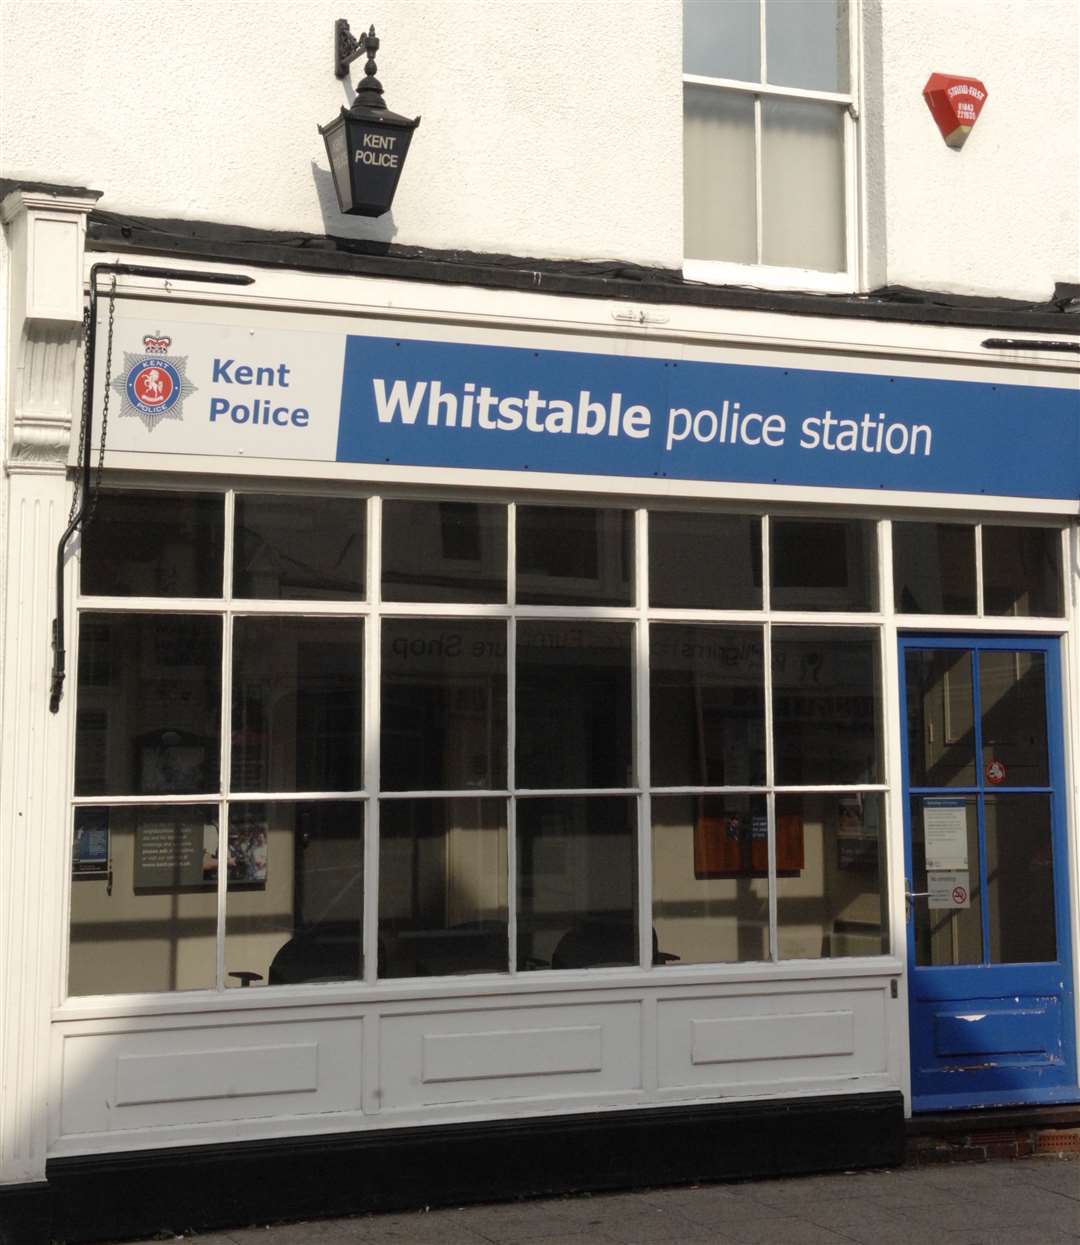 The Whitstable Police Station, photographed in 2012, close to the point at which High Street merges in Oxford Street